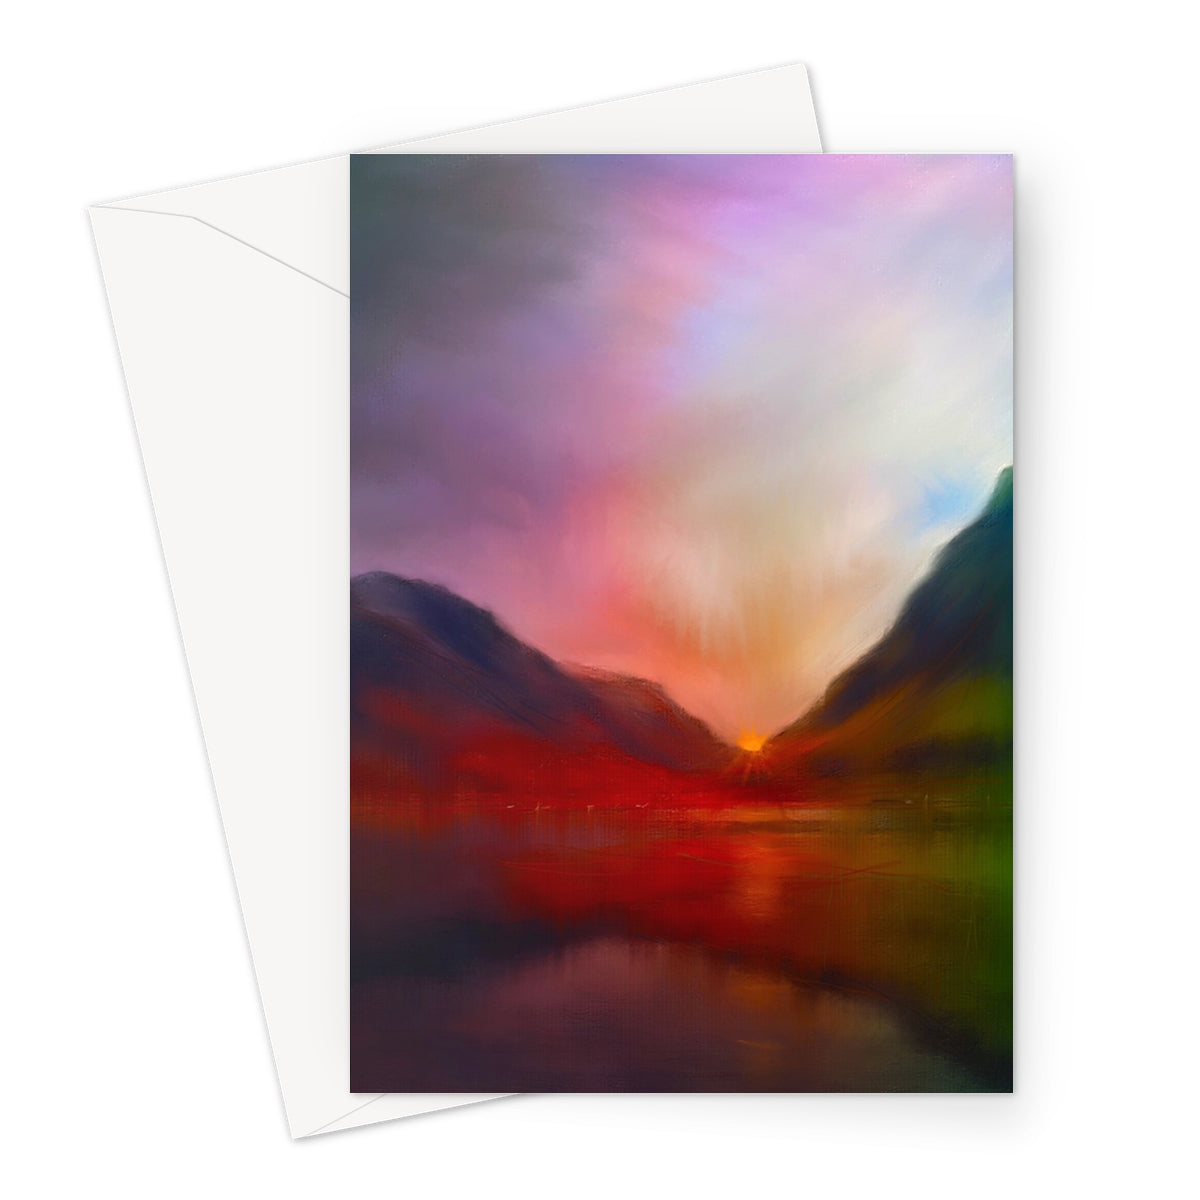 Glencoe Sunset Art Gifts Greeting Card-Greetings Cards-Glencoe Art Gallery-A5 Portrait-1 Card-Paintings, Prints, Homeware, Art Gifts From Scotland By Scottish Artist Kevin Hunter